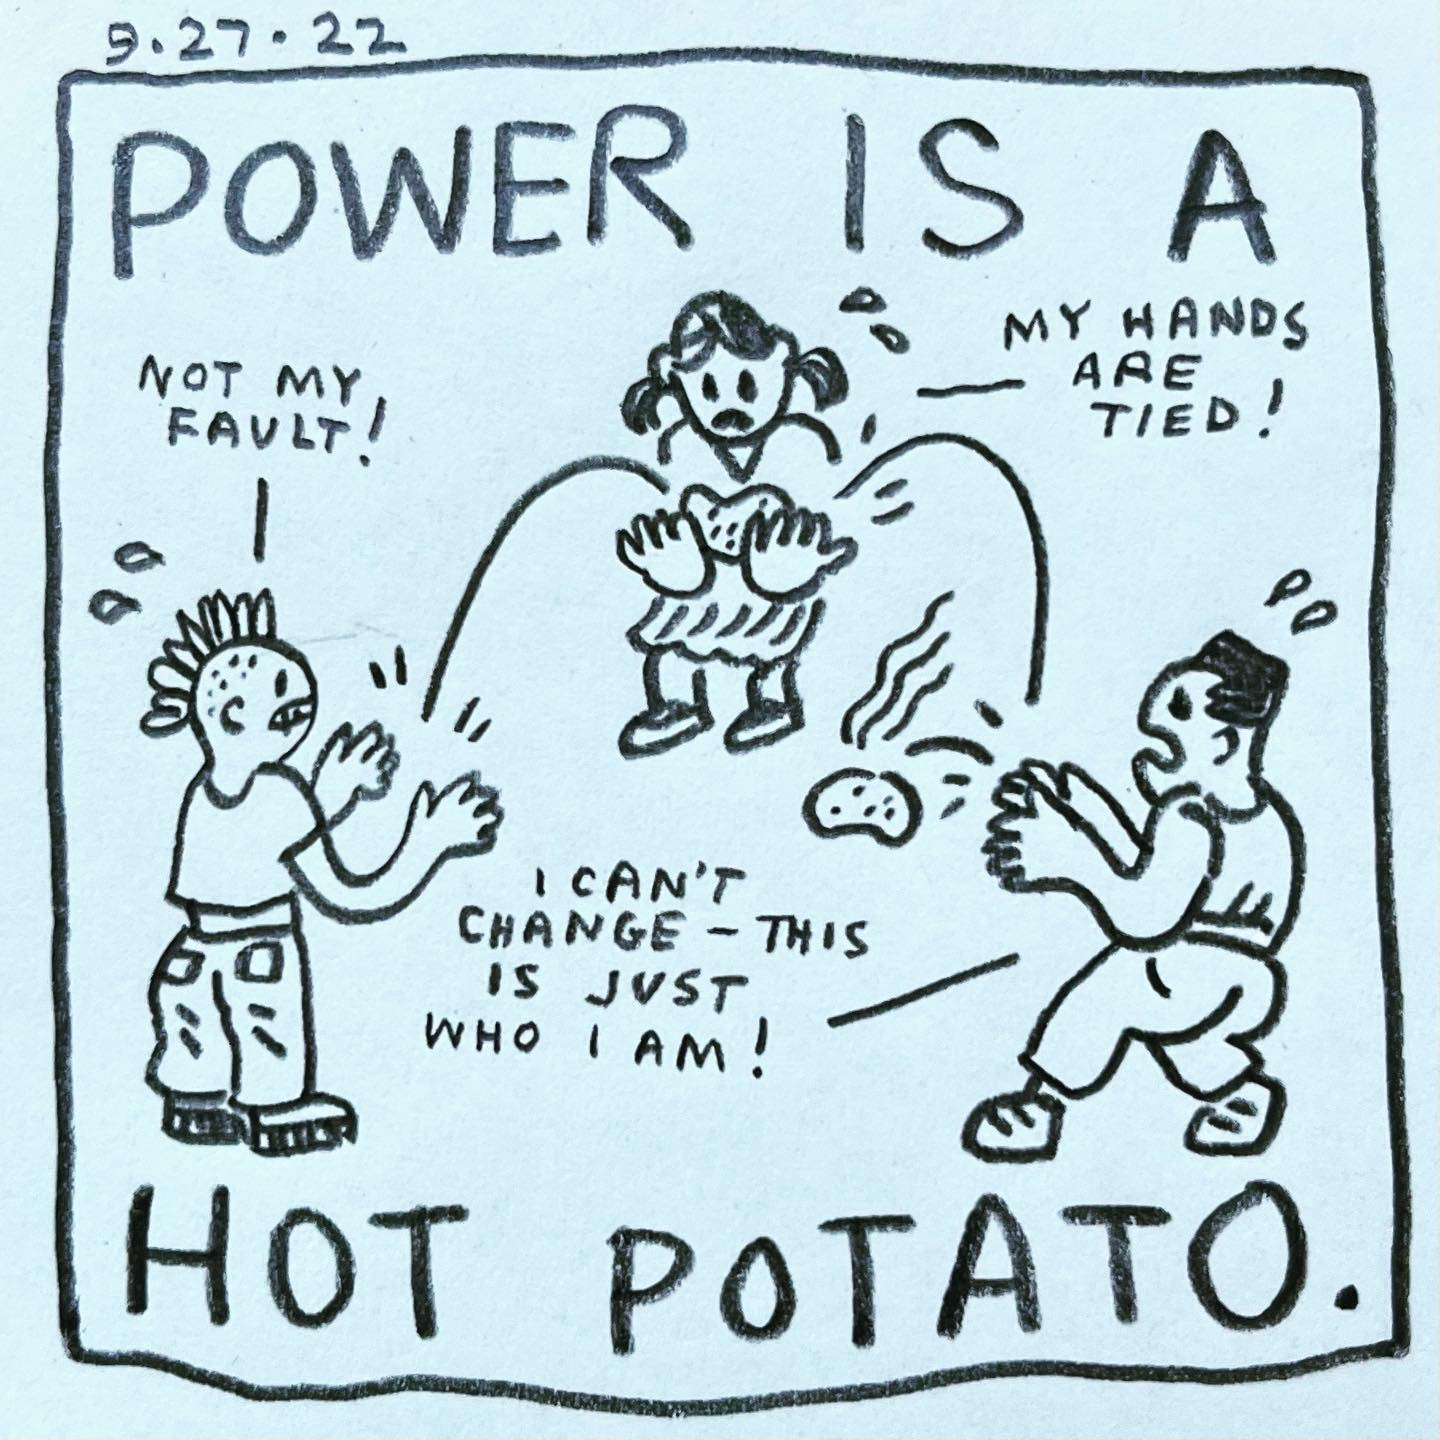 Panel 1: power is a hot potato. Image: three anxious people toss a hot potato back and forth between them. One, with a mohawk, says “not my fault!" One, wearing pigtails and a skirt, says, "my hands are tied!" One, with a flat top haircut and shapely legs, says, "I can't change - this is just who I am!”